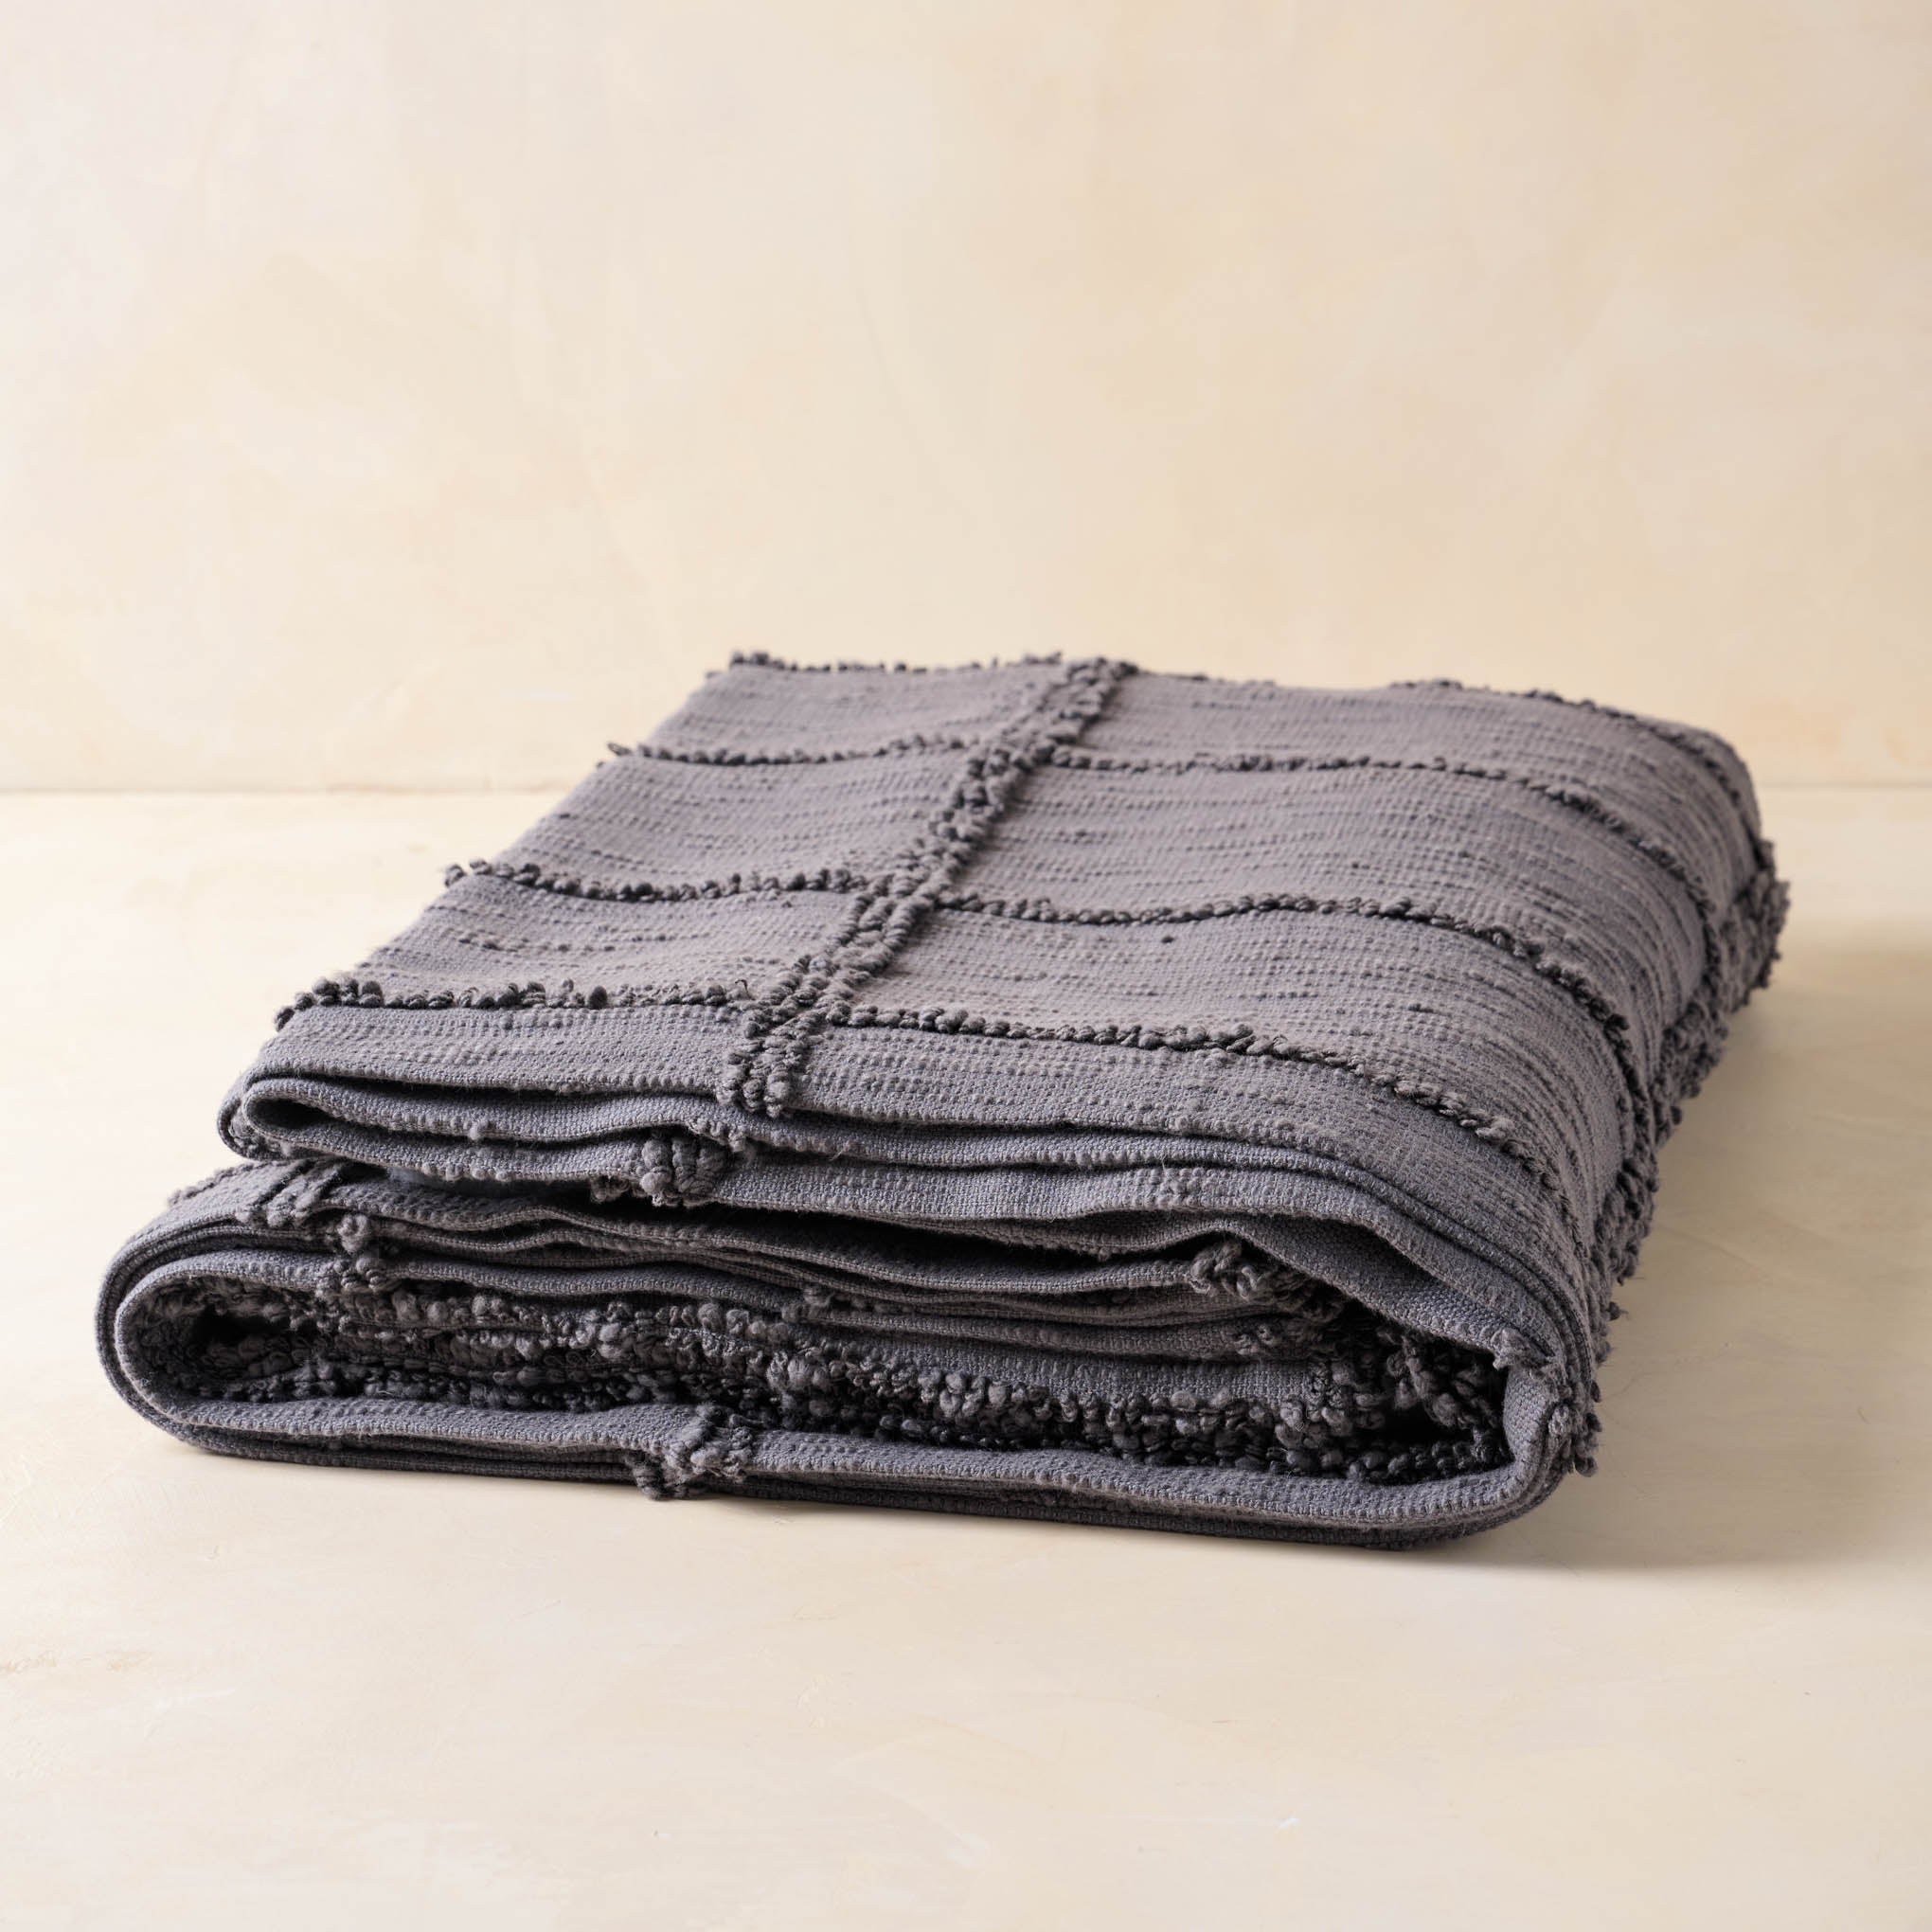 Slate Textured Cotton Coverlet On sale with items ranging from $90.00 to $100.00, discounted from $180.00 to $200.00